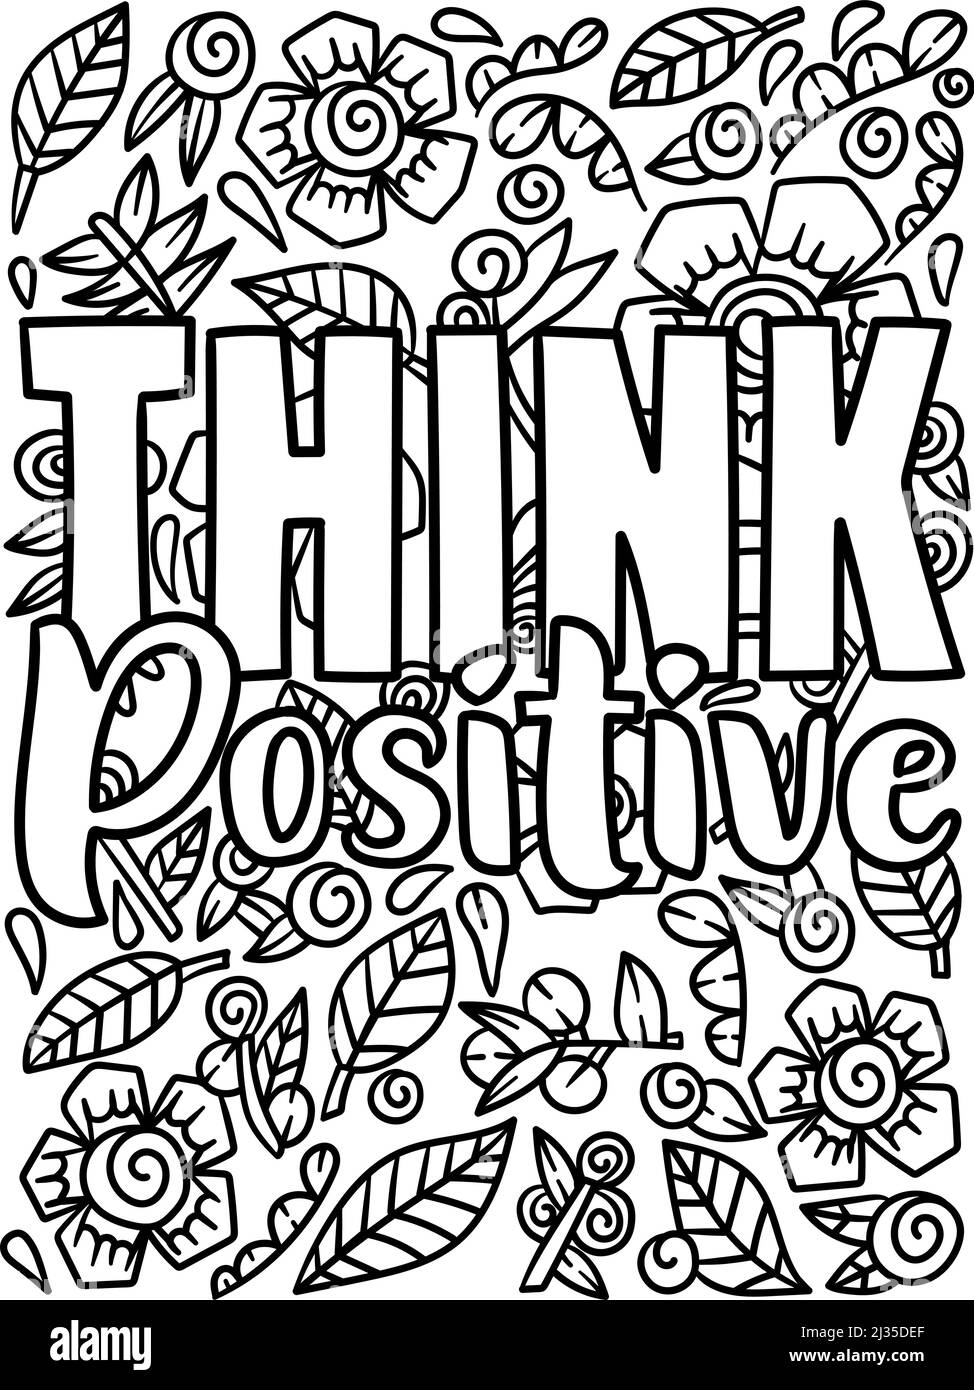 Think Positive Motivational Quote Coloring Page Stock Vector